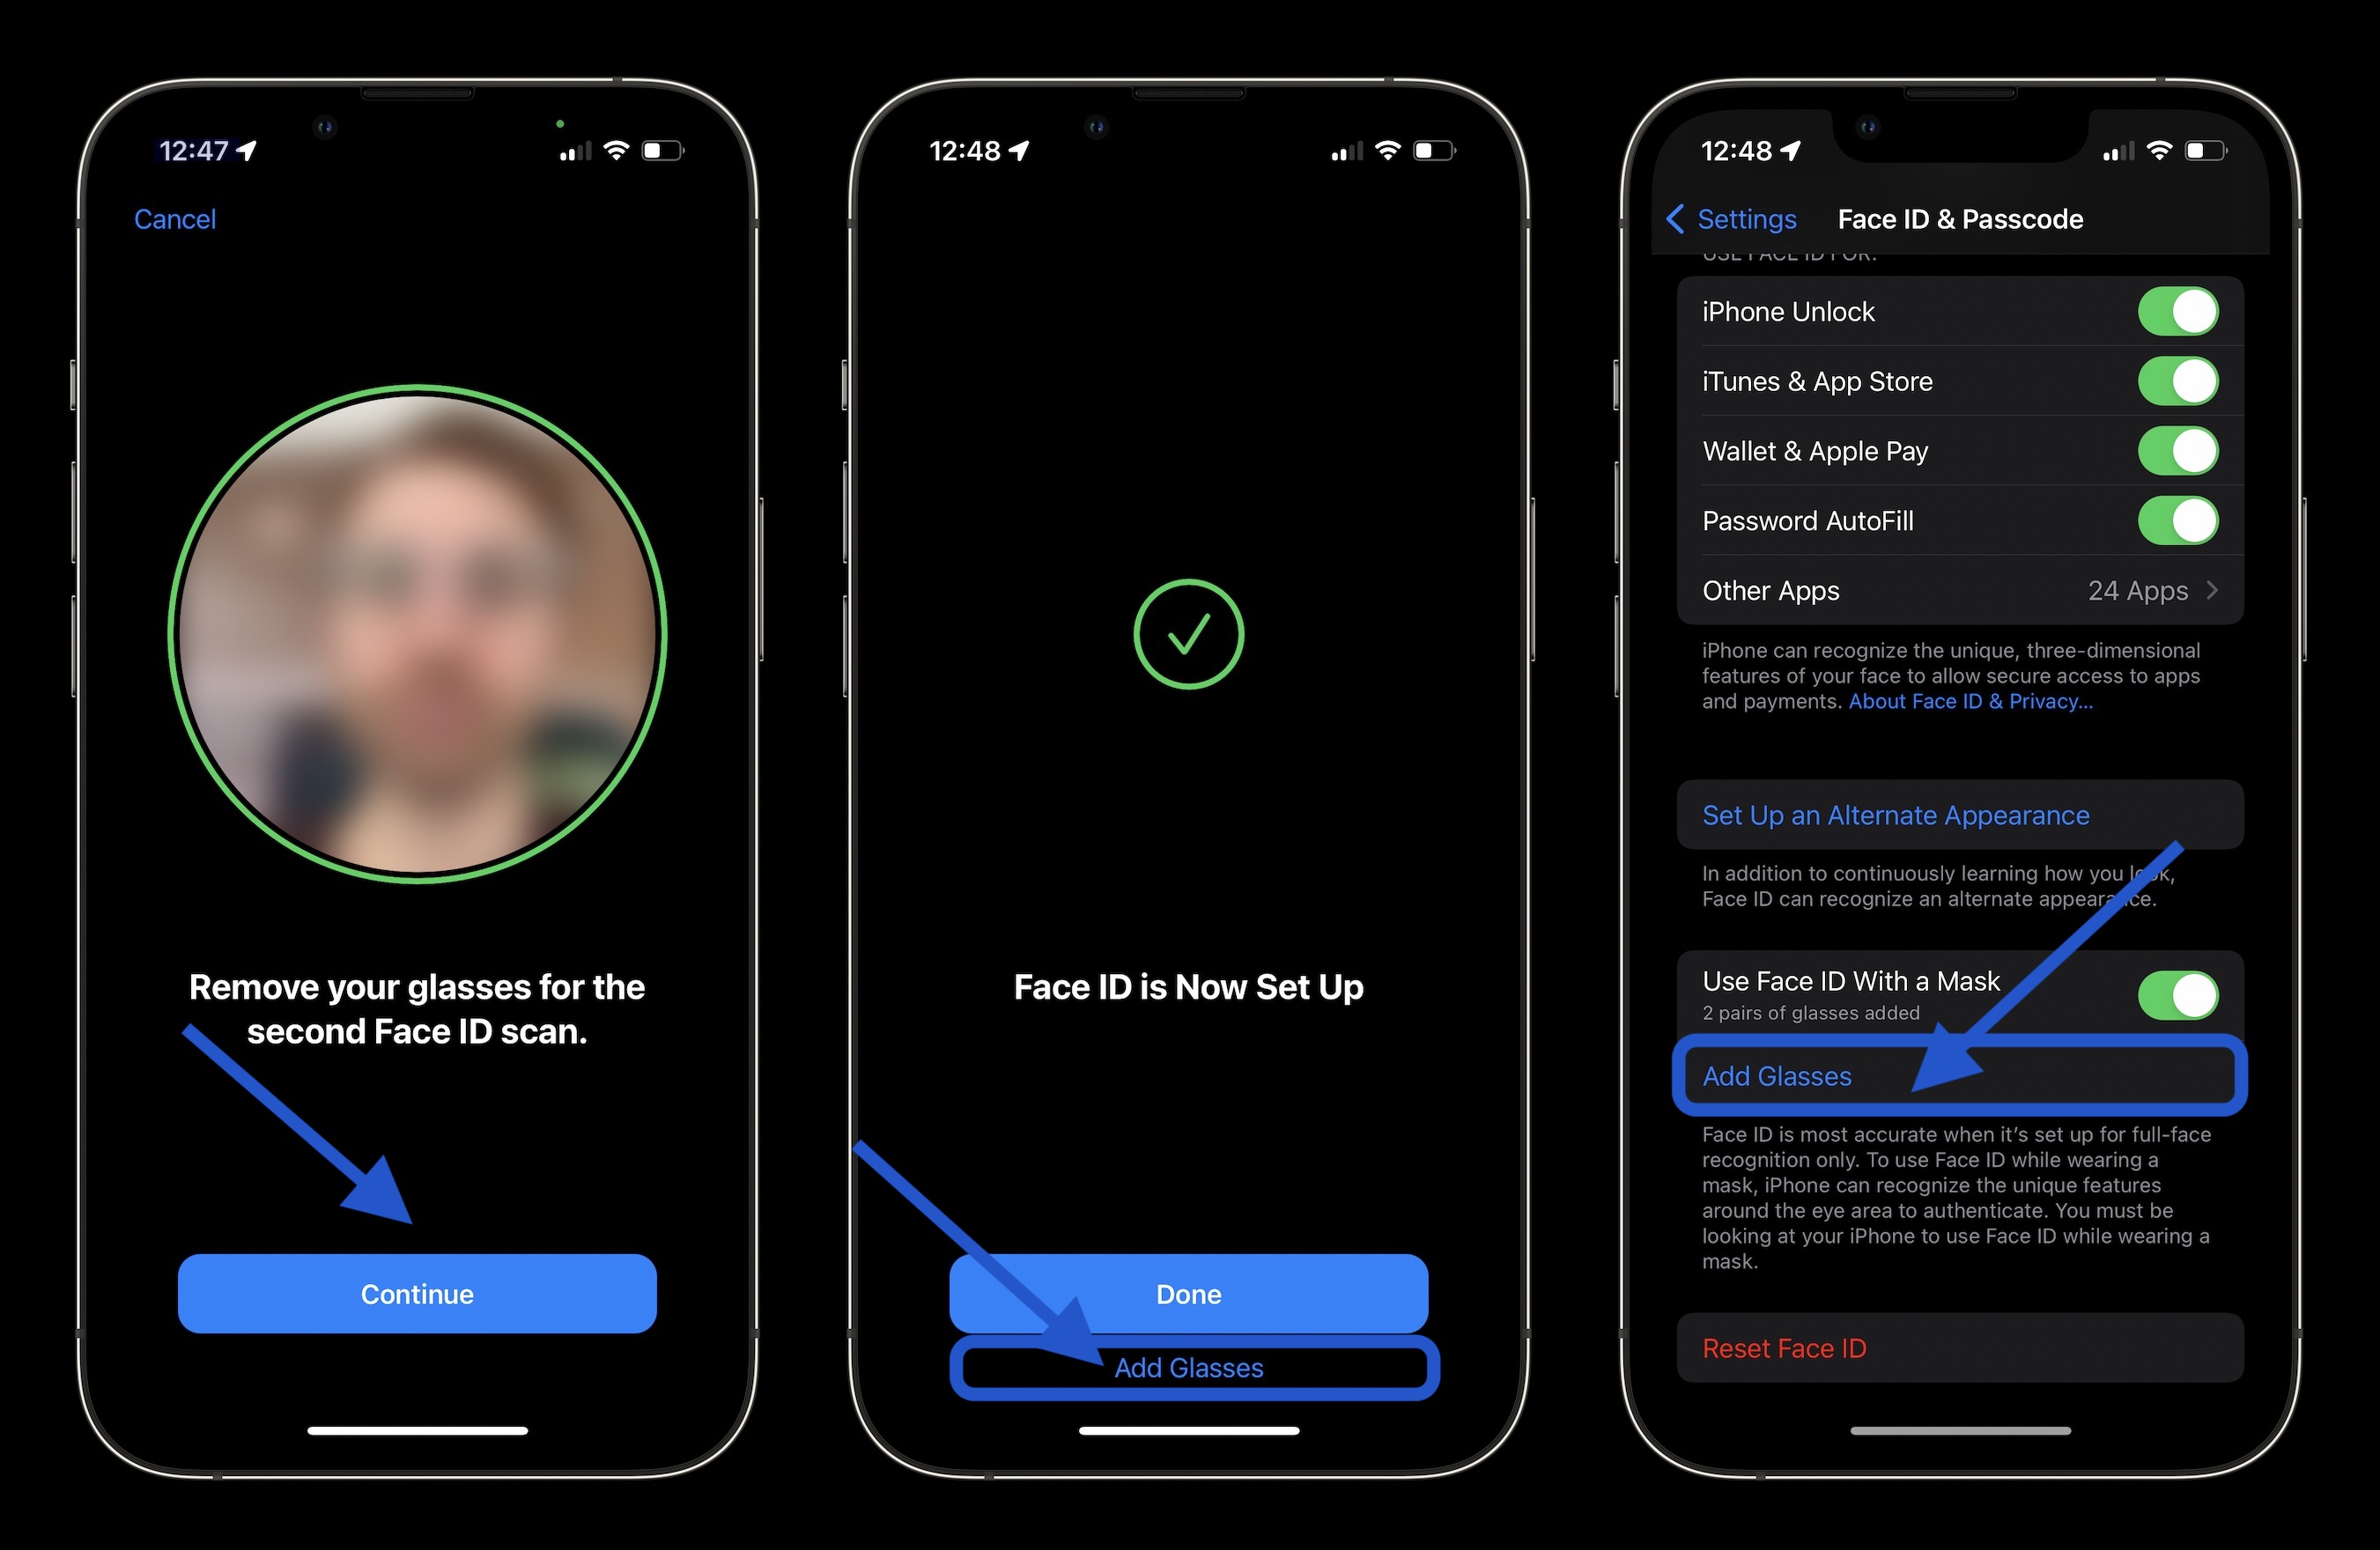 How to use iPhone Face ID With a Mask in iOS 15.4 walkthrough 2